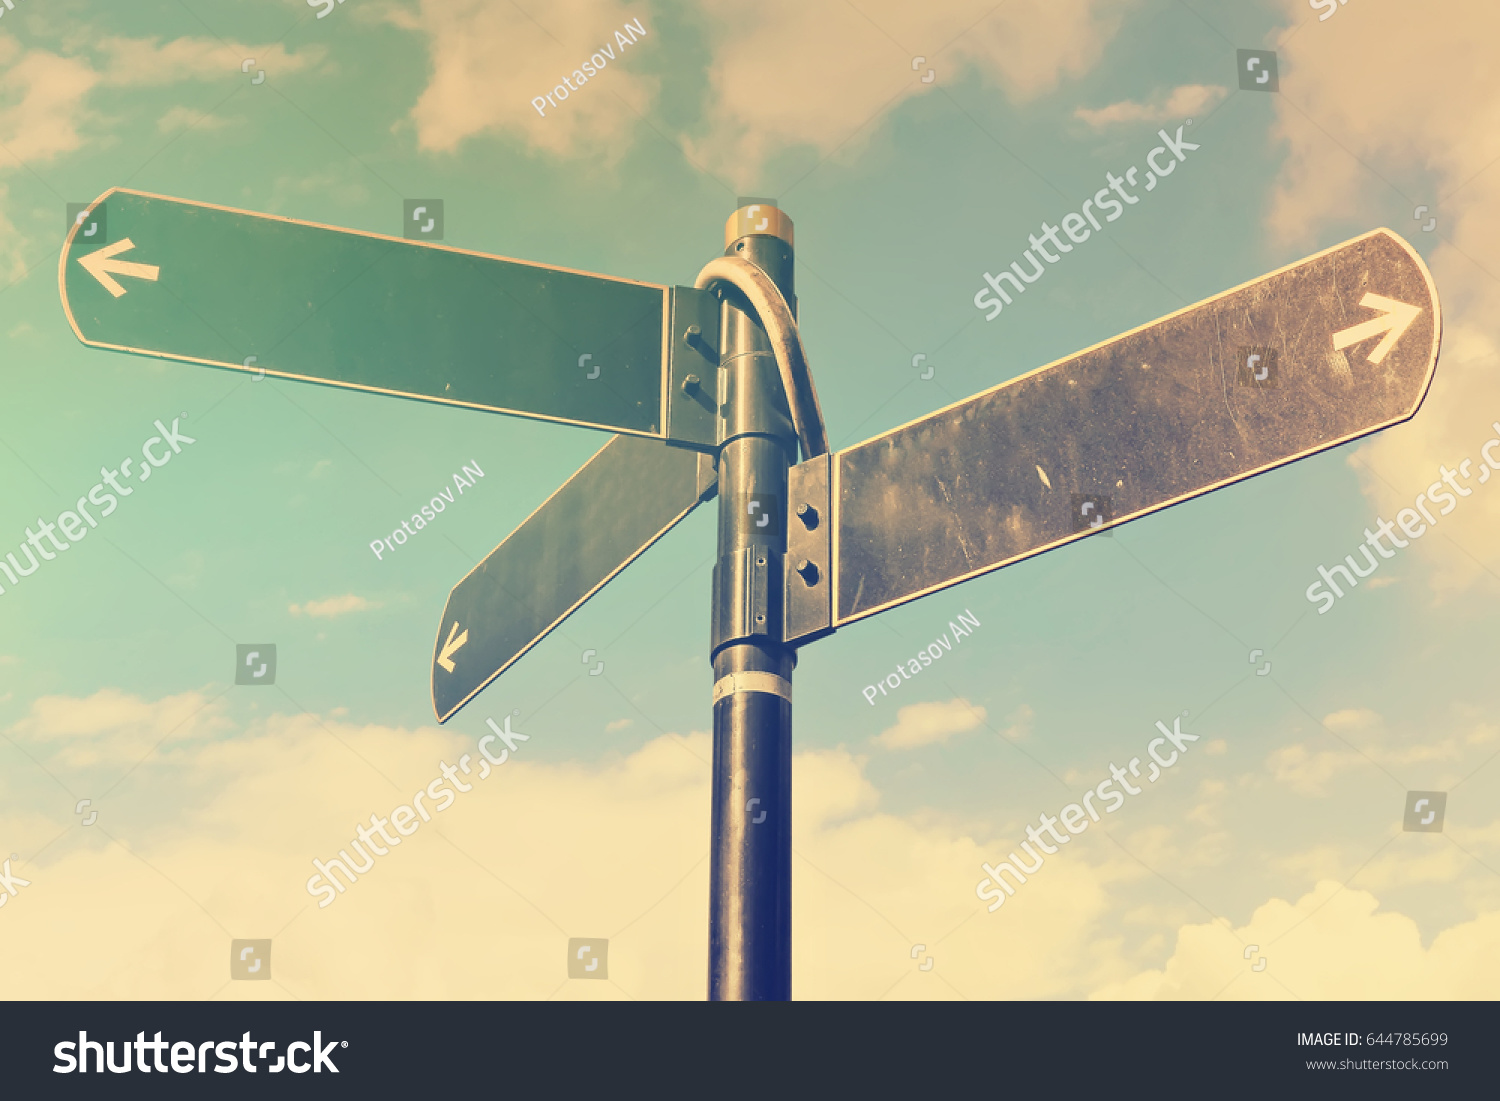 Blank directional road signs against blue sky. Black metal arrows on the signpost. Warm toned colors.  Old style image  #644785699